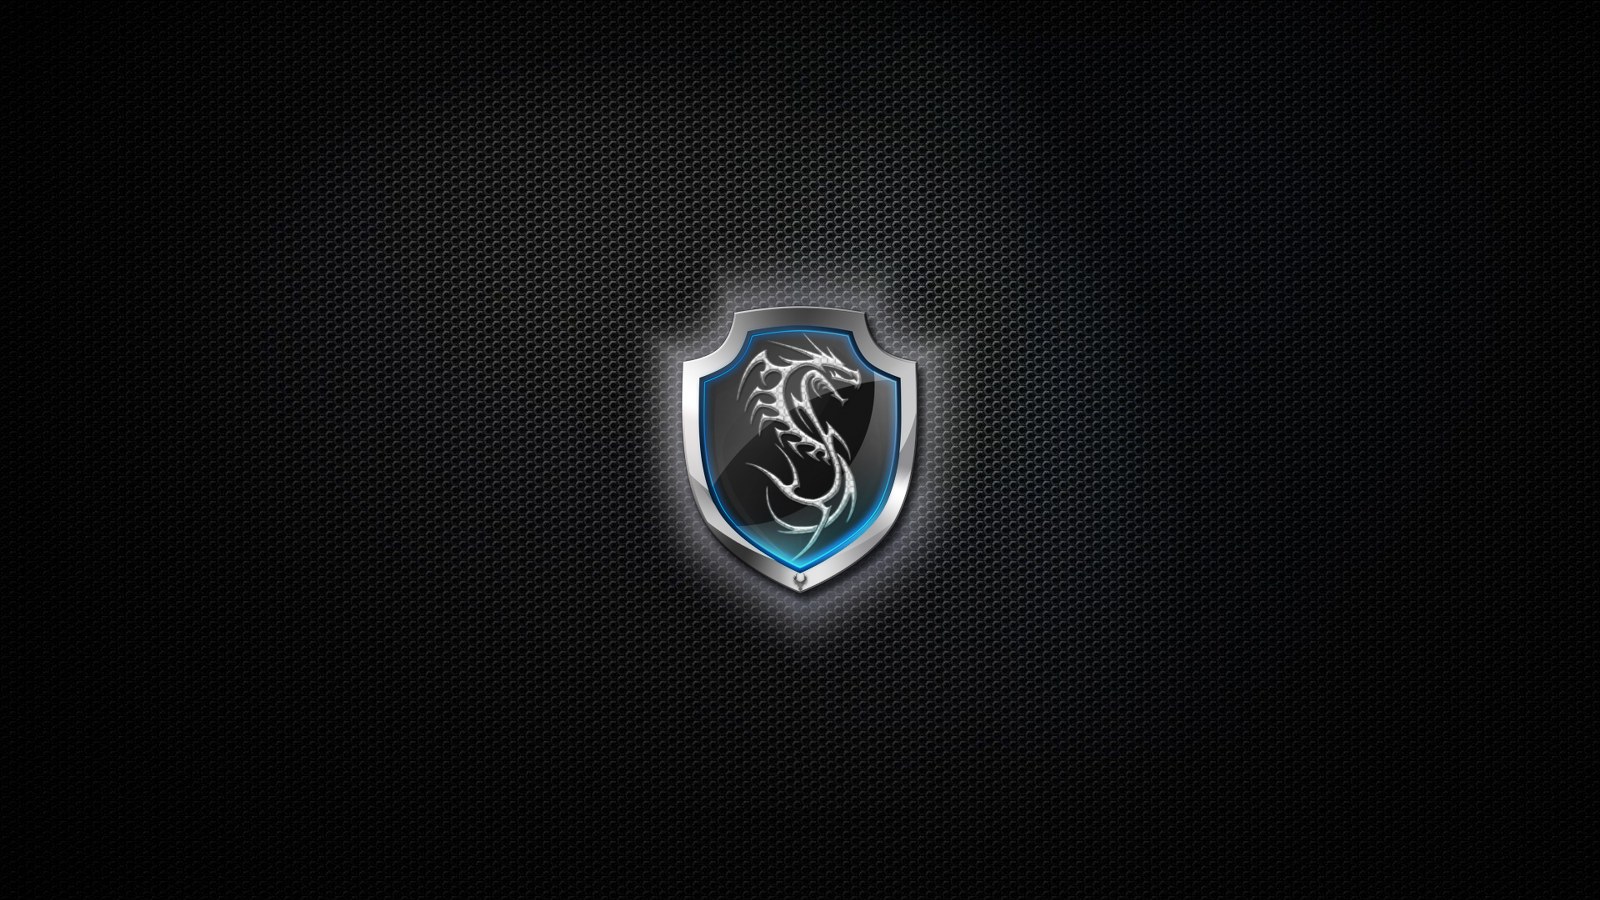 Dragon Logo Pictures1 wallpapers55com   Best Wallpapers for PCs 1600x900